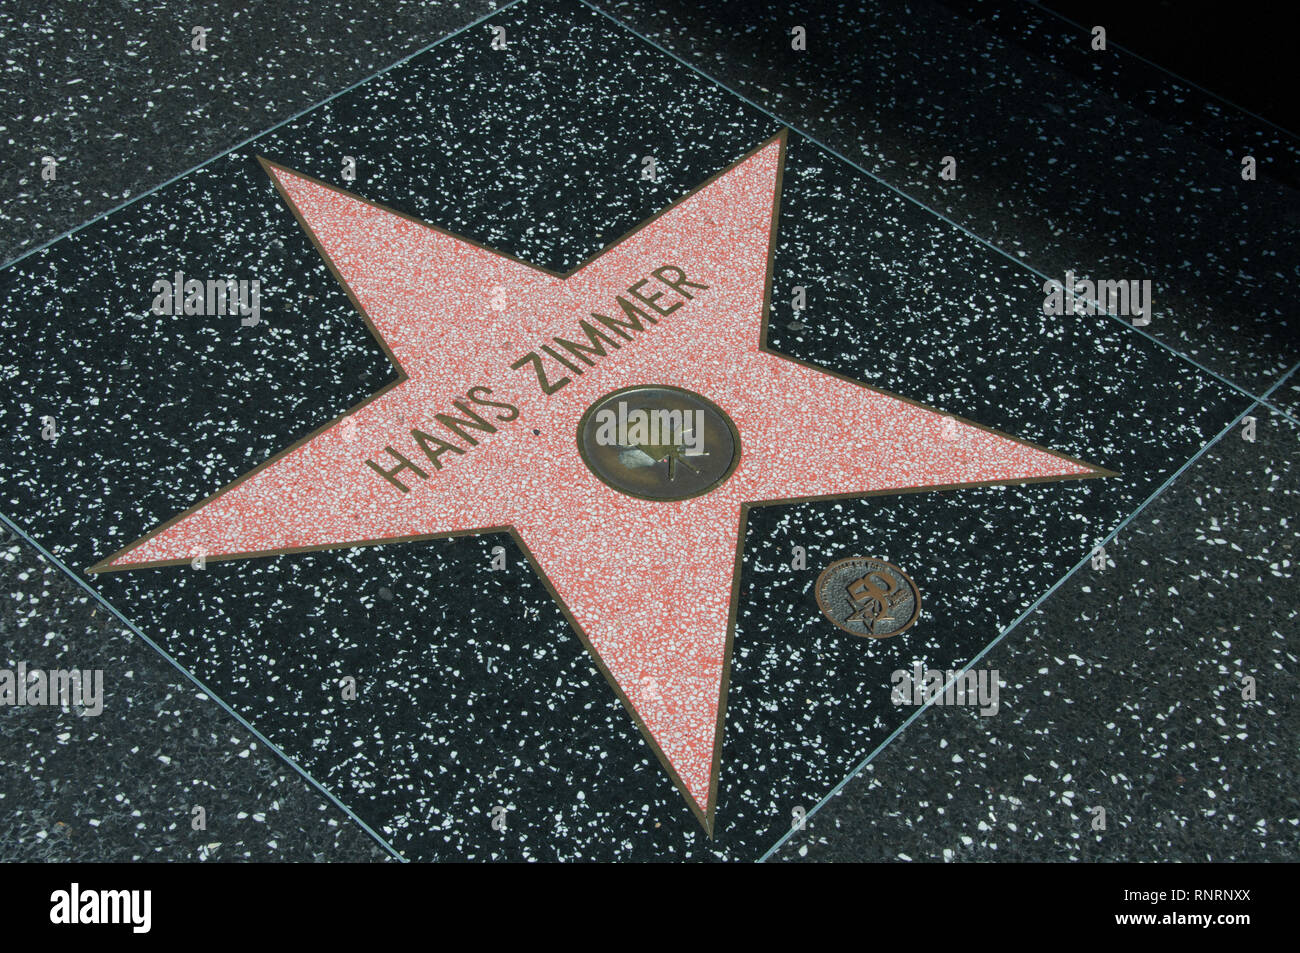 Holywood, Los Angeles, California, USA - June 14, 2014: Star of Hans Zimmer on the Walk of Fame Stock Photo